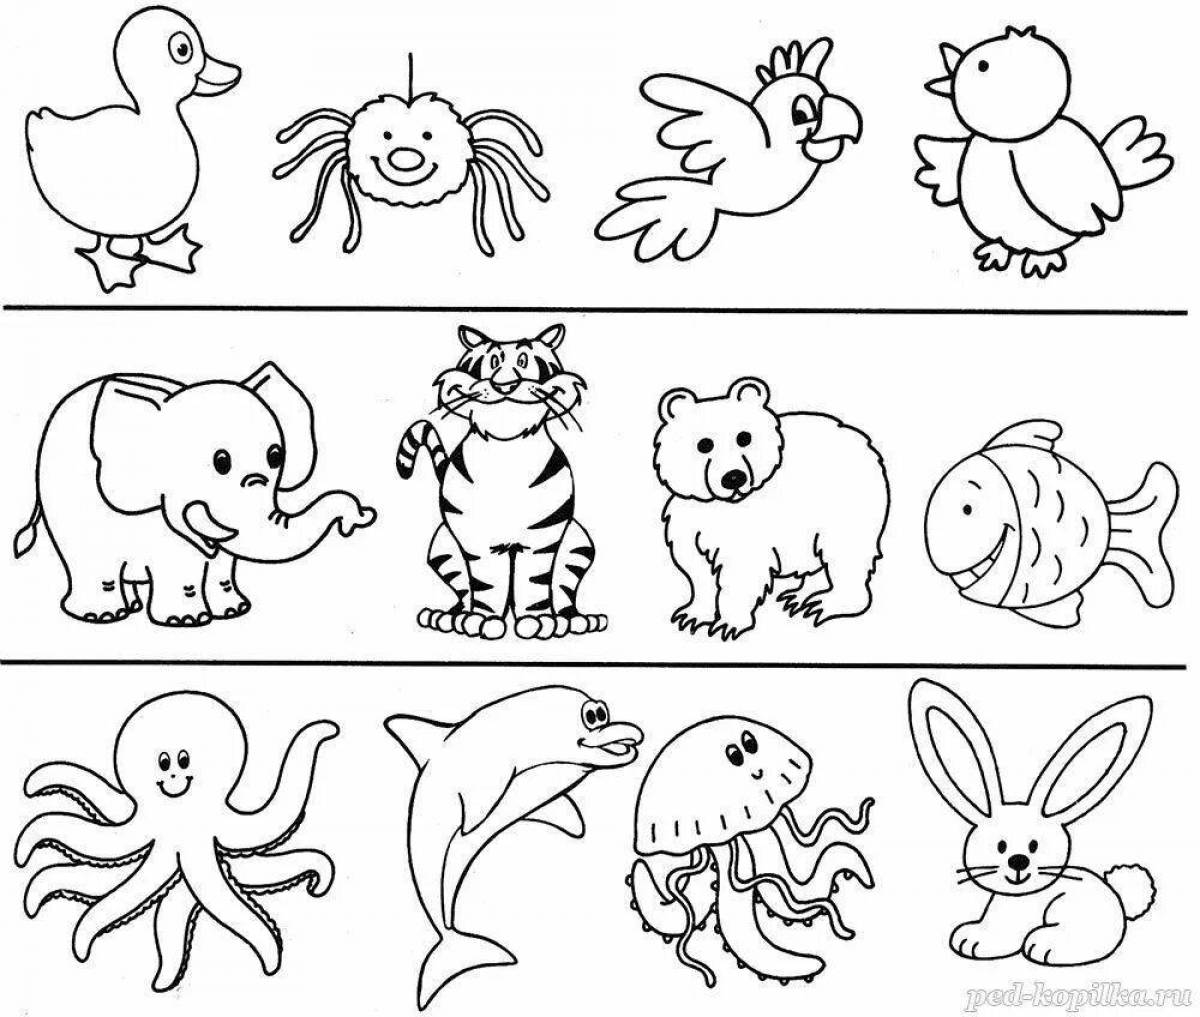 Fascinating coloring book for kids to develop